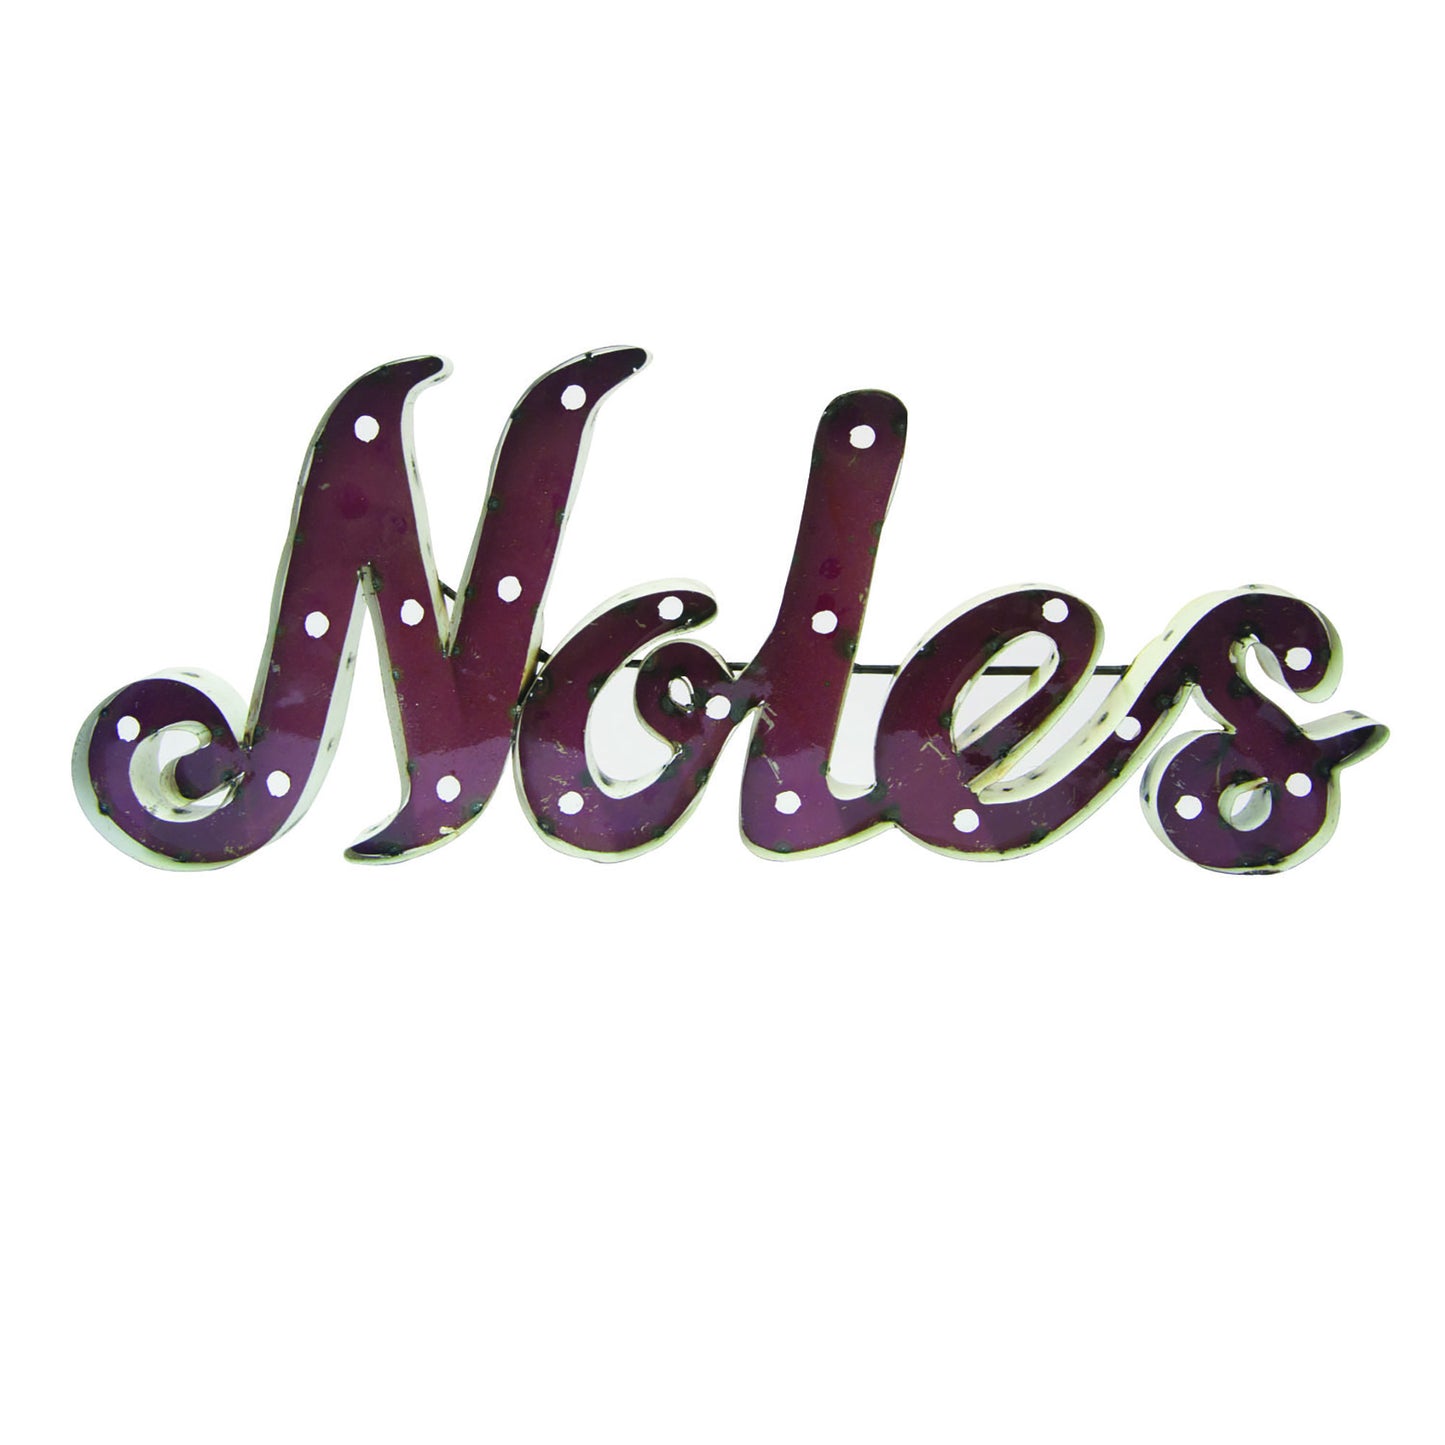 Florida State University "Noles" Lighted Recycled Metal Sign